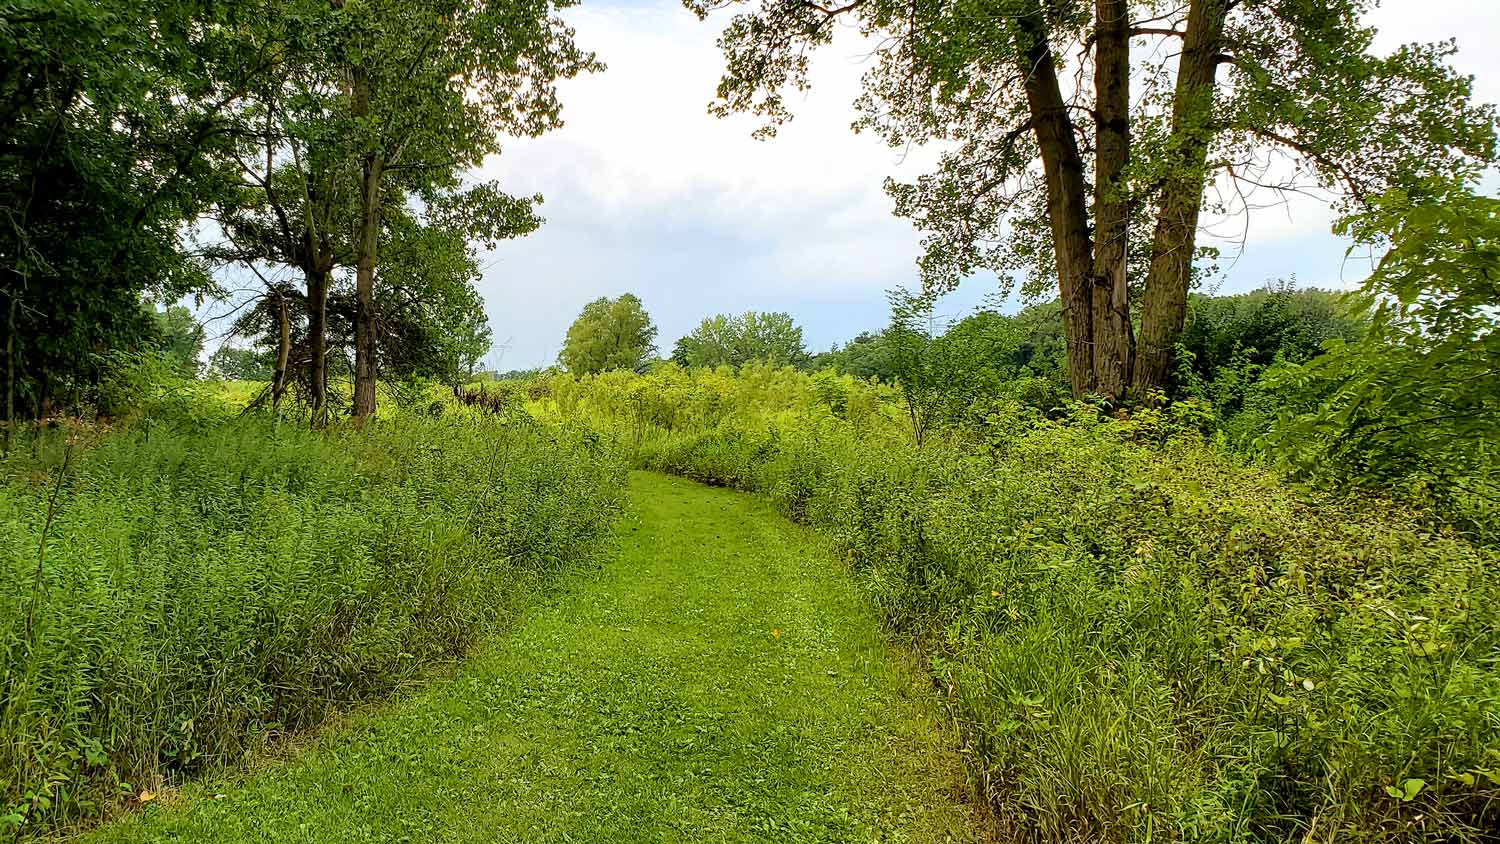 Grass-covered hiking path at the Pleasant Valley Conservation Area.